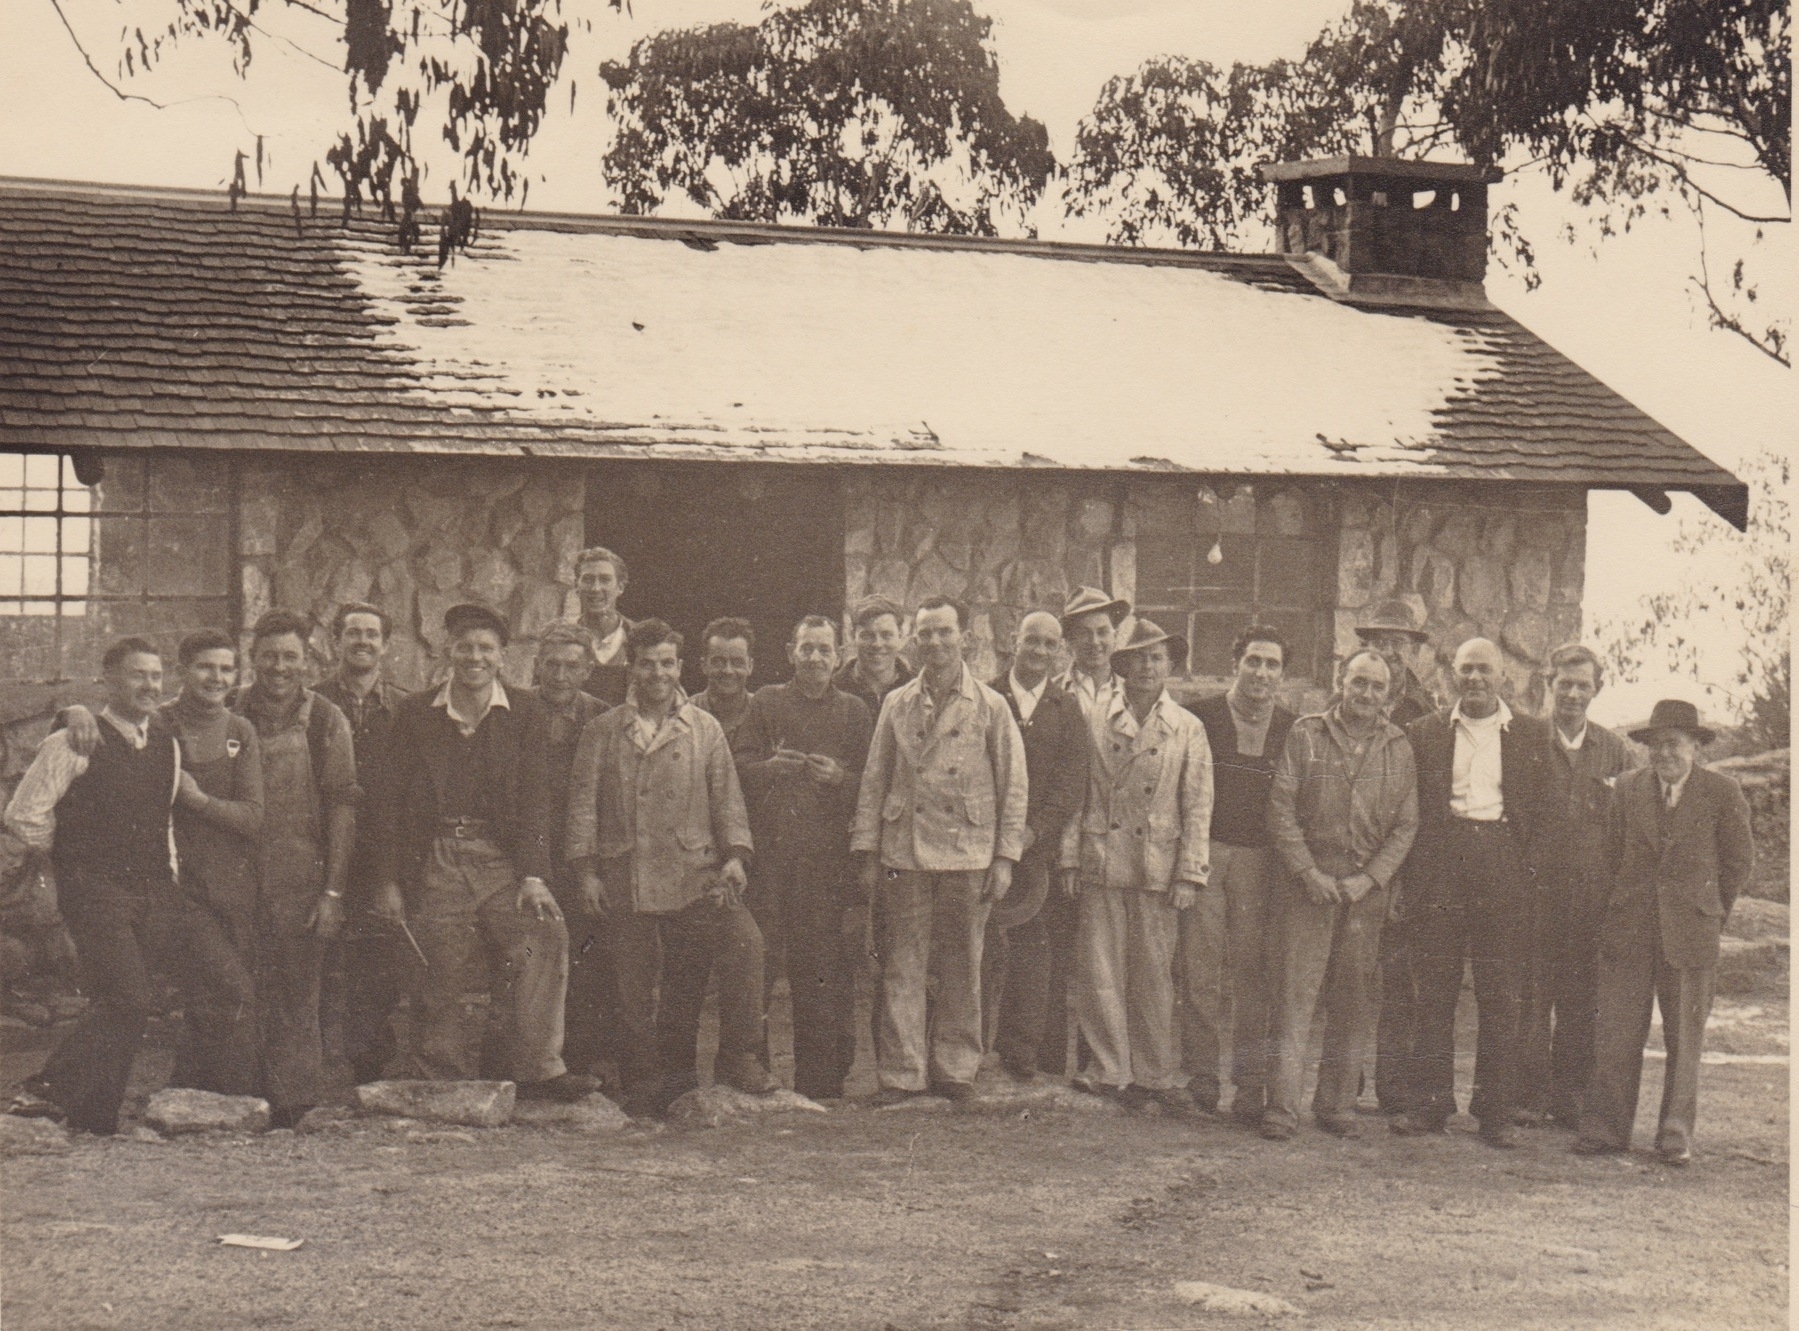 Railway tradesmen. Carpenters, plumbers, painters, tilers, and labourers. Photo taken at Echo Point, June 1952. Third from left: Les Merton, plumber. Back row right of door, myself, carpenter. Back row left of window, Allan Coulson, carpenter. Extreme right, engineer. Third from right, Leslie Brush, foreman carpenter.